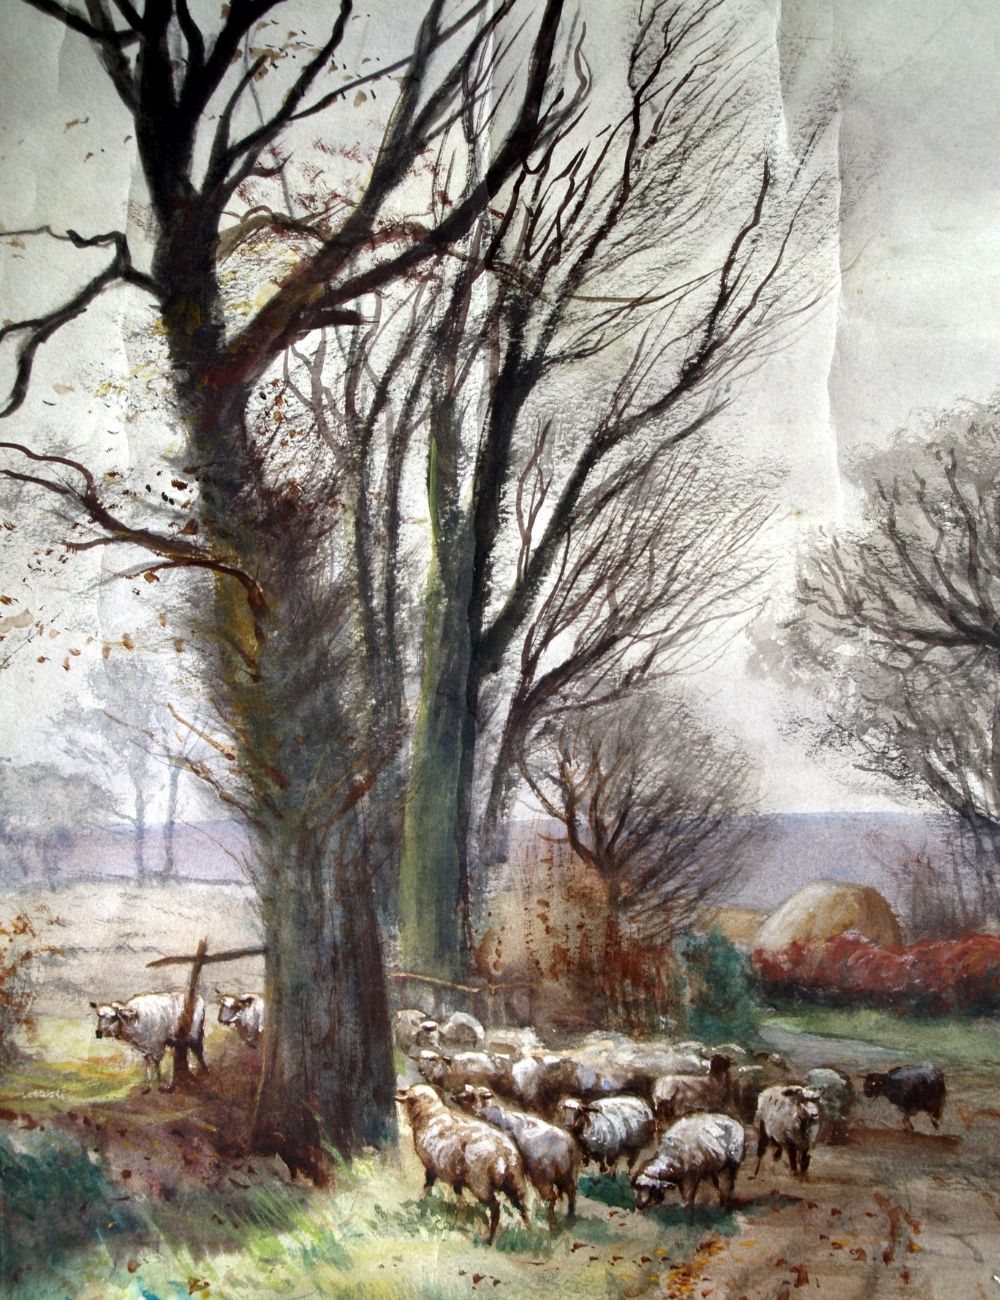 Watercolour painting showing sheep crossing a stile into a field.